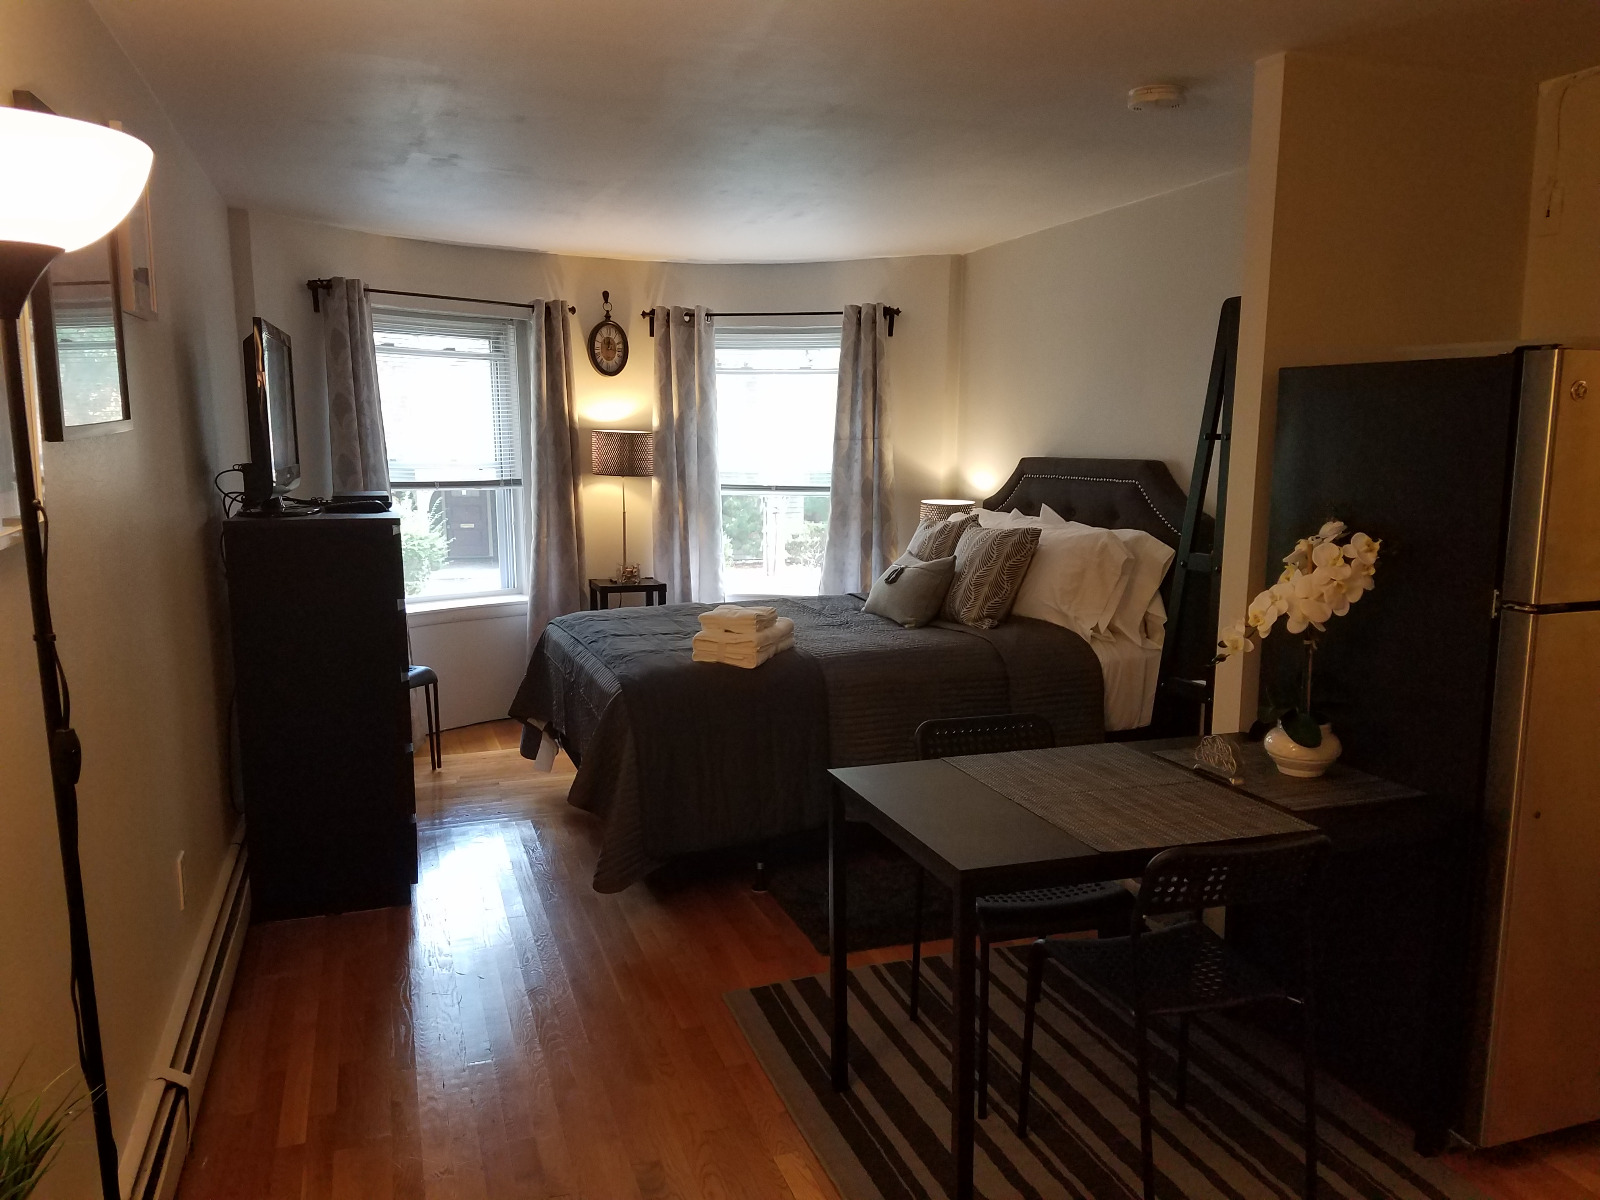 Photos of apartment on Winthrop Rd.,Brookline MA 02446